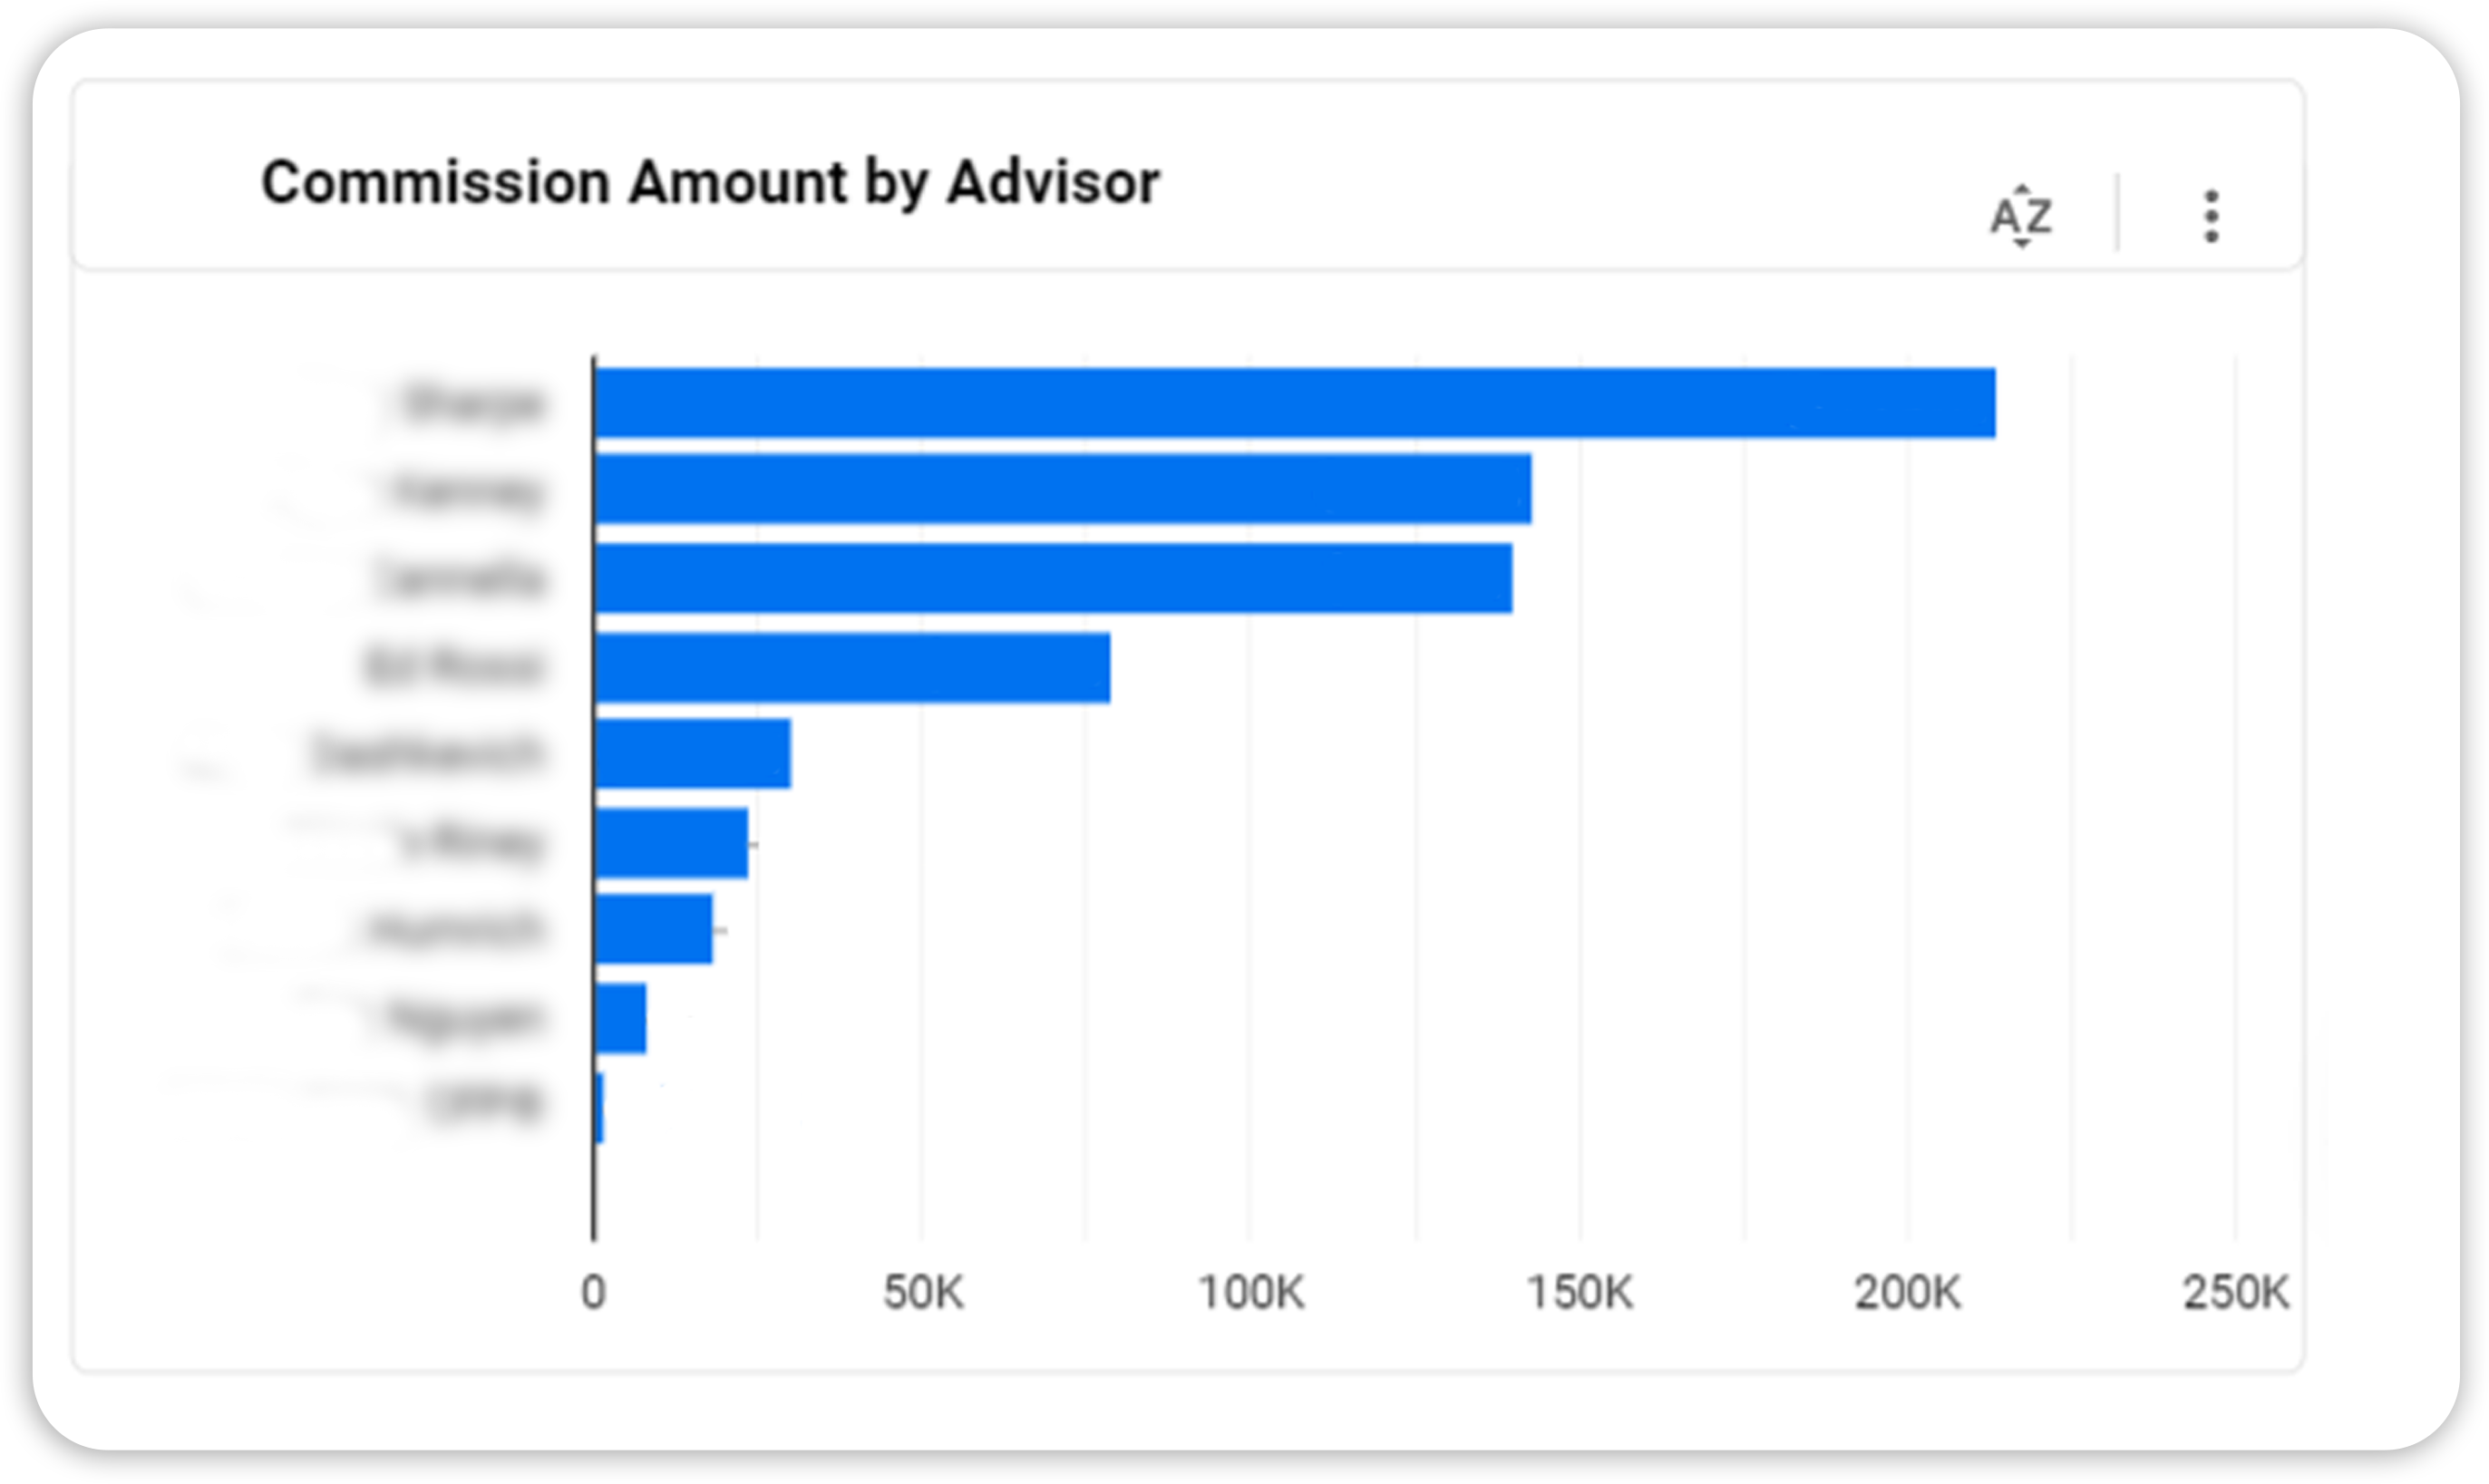 Commission Amount by Advisor